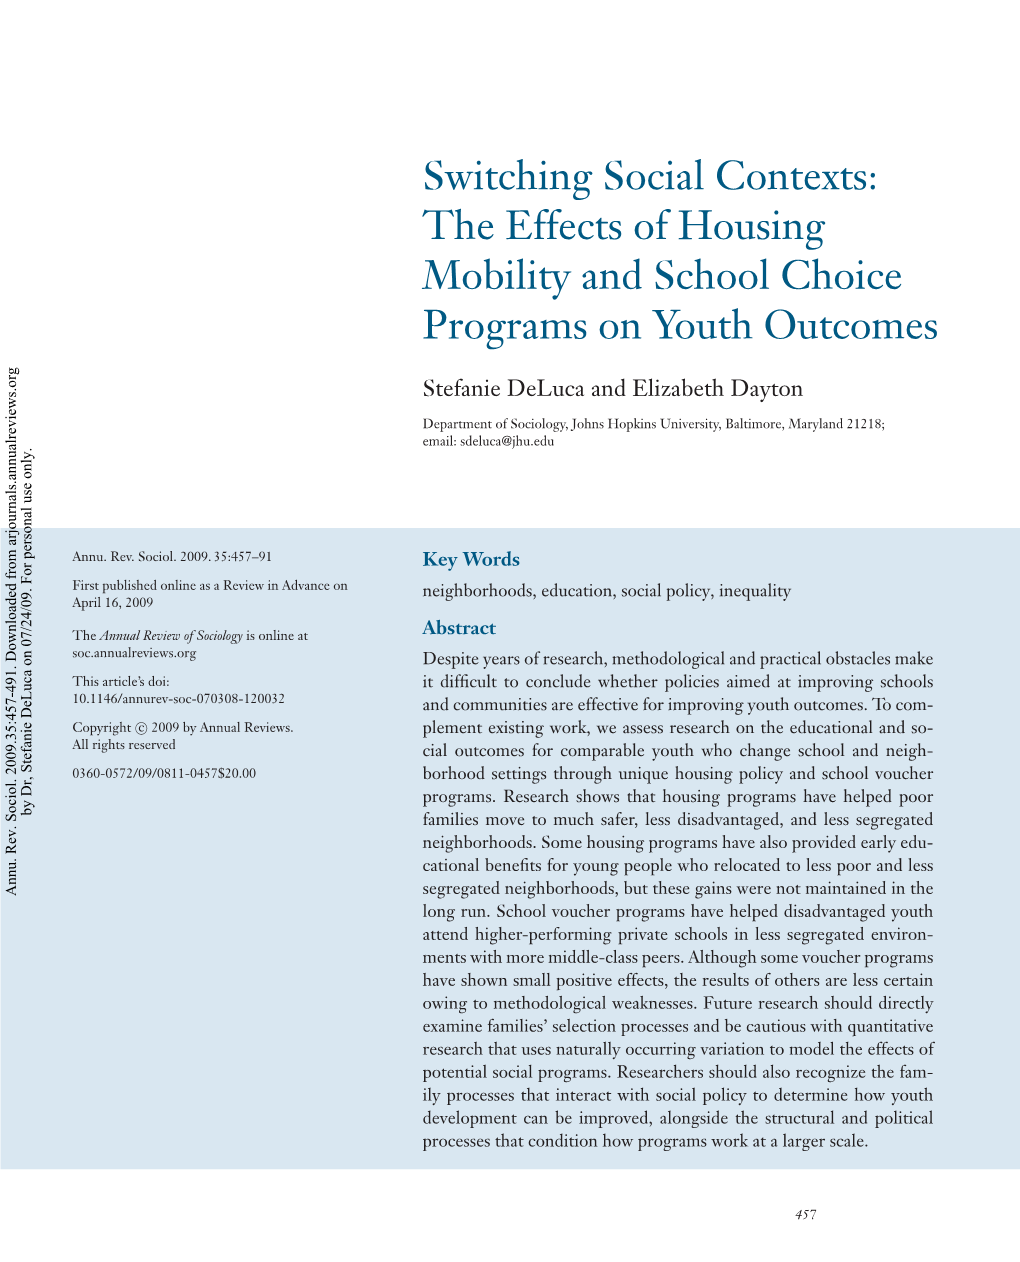 Switching Social Contexts: the Effects of Housing Mobility and School Choice Programs on Youth Outcomes